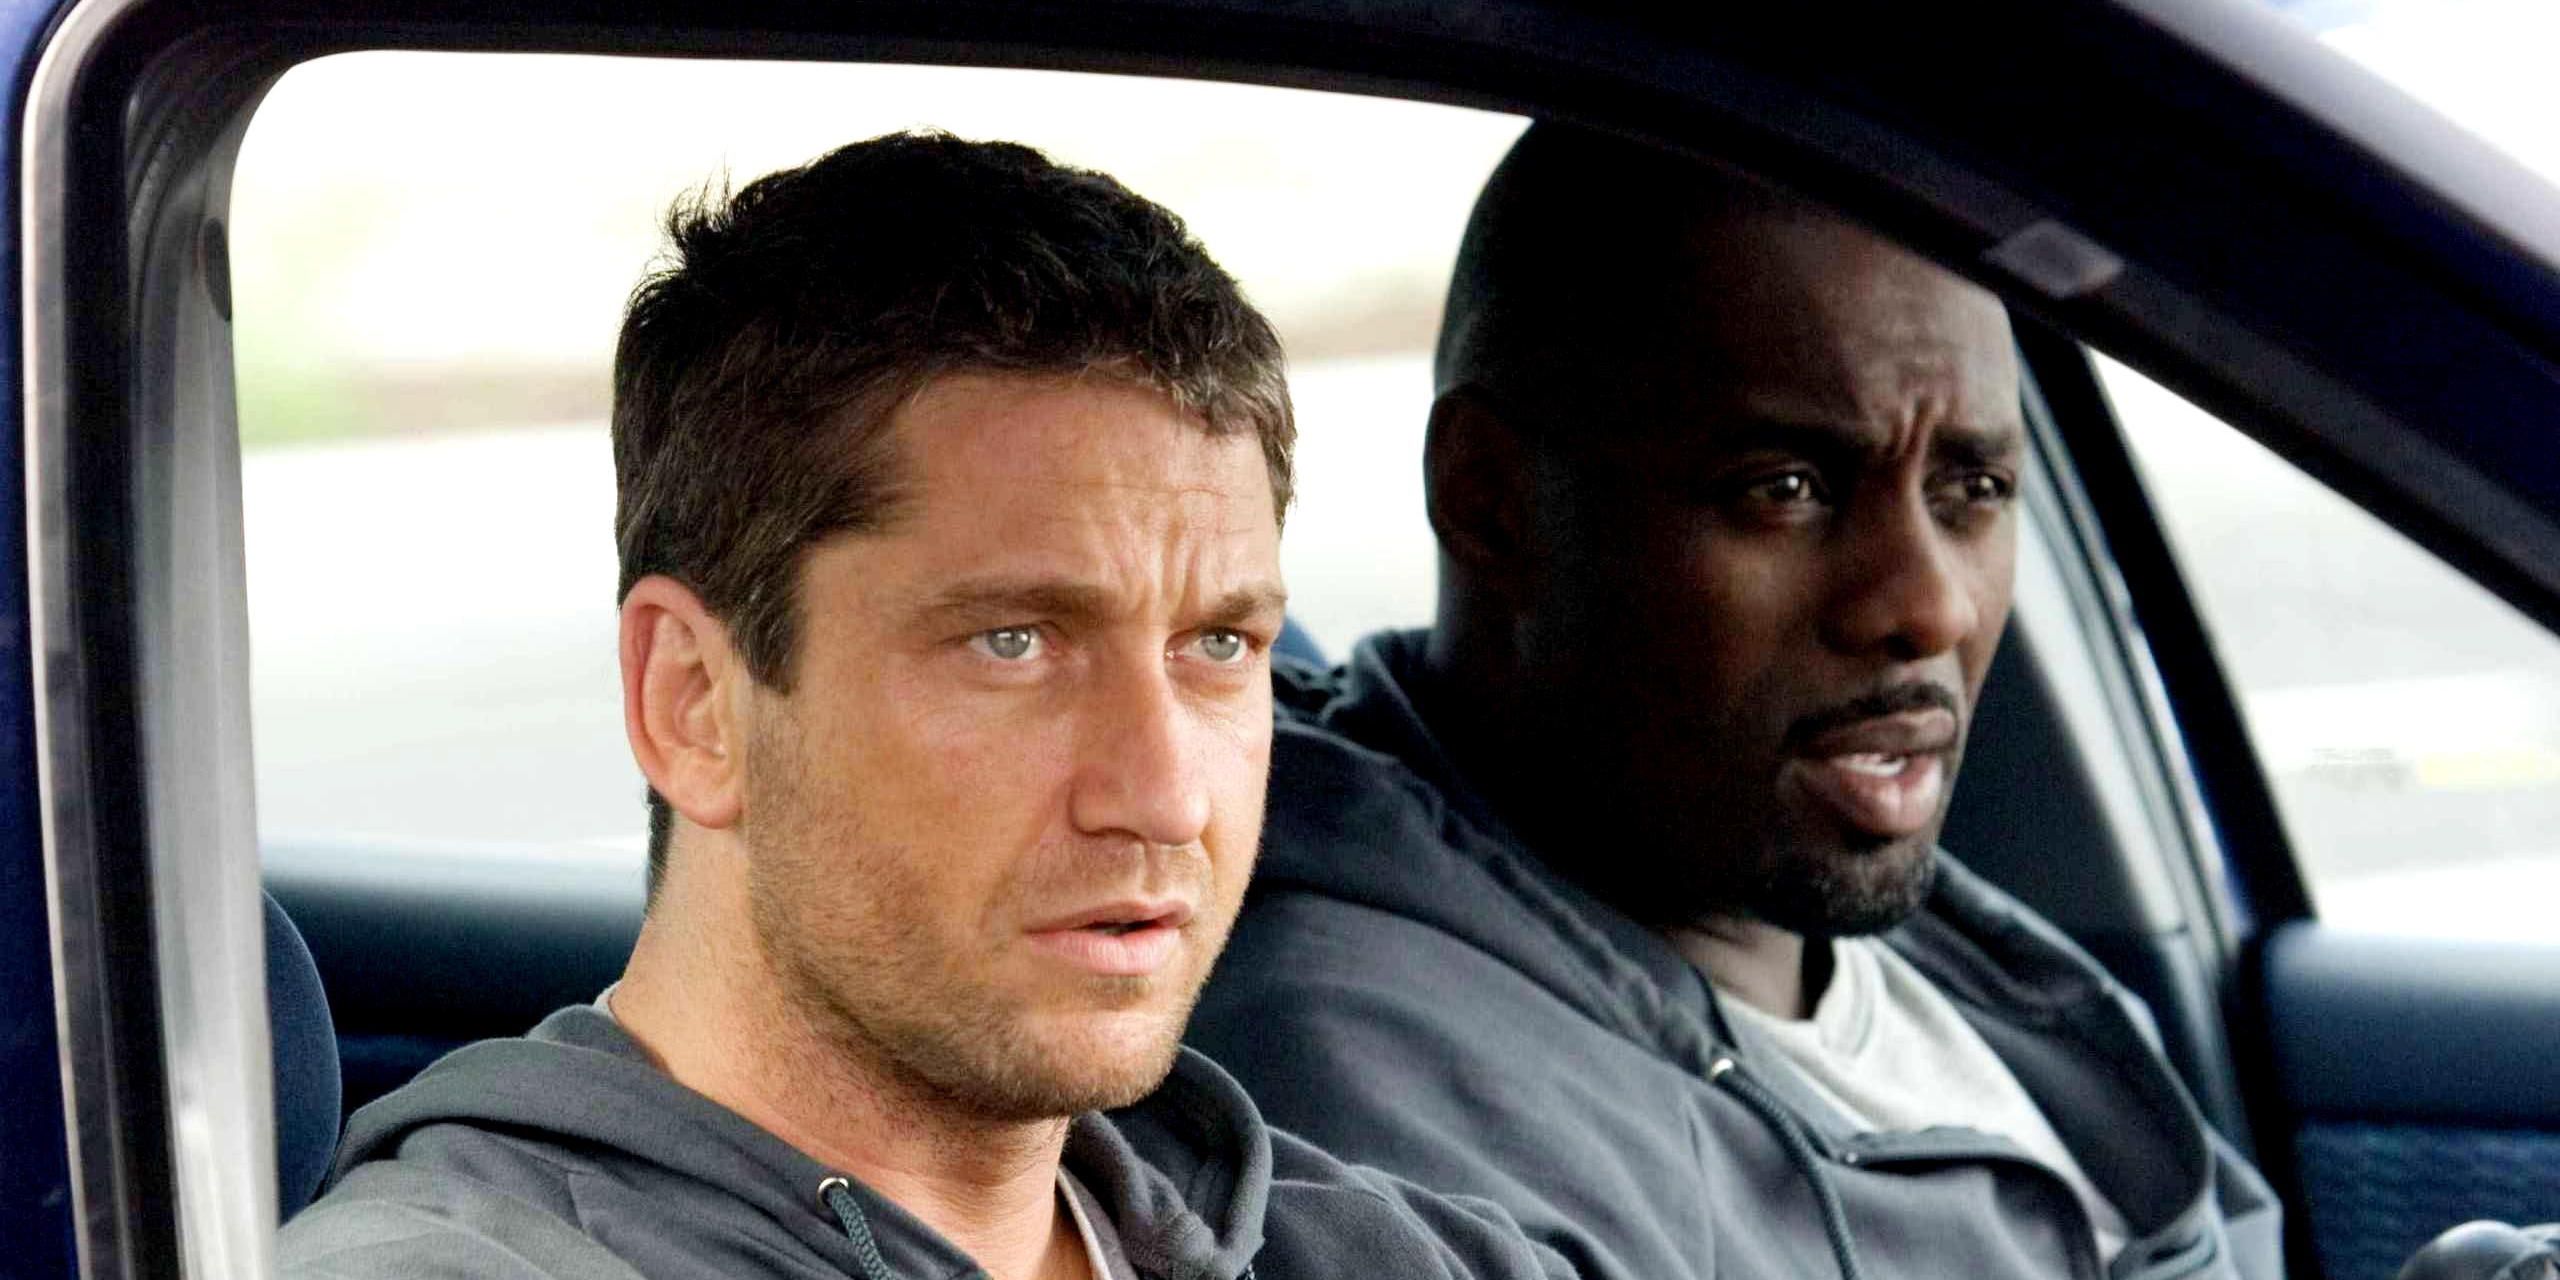 Gerard Butler as One-Two and Idris Elba as Mumbles sitting in a car in RocknRolla